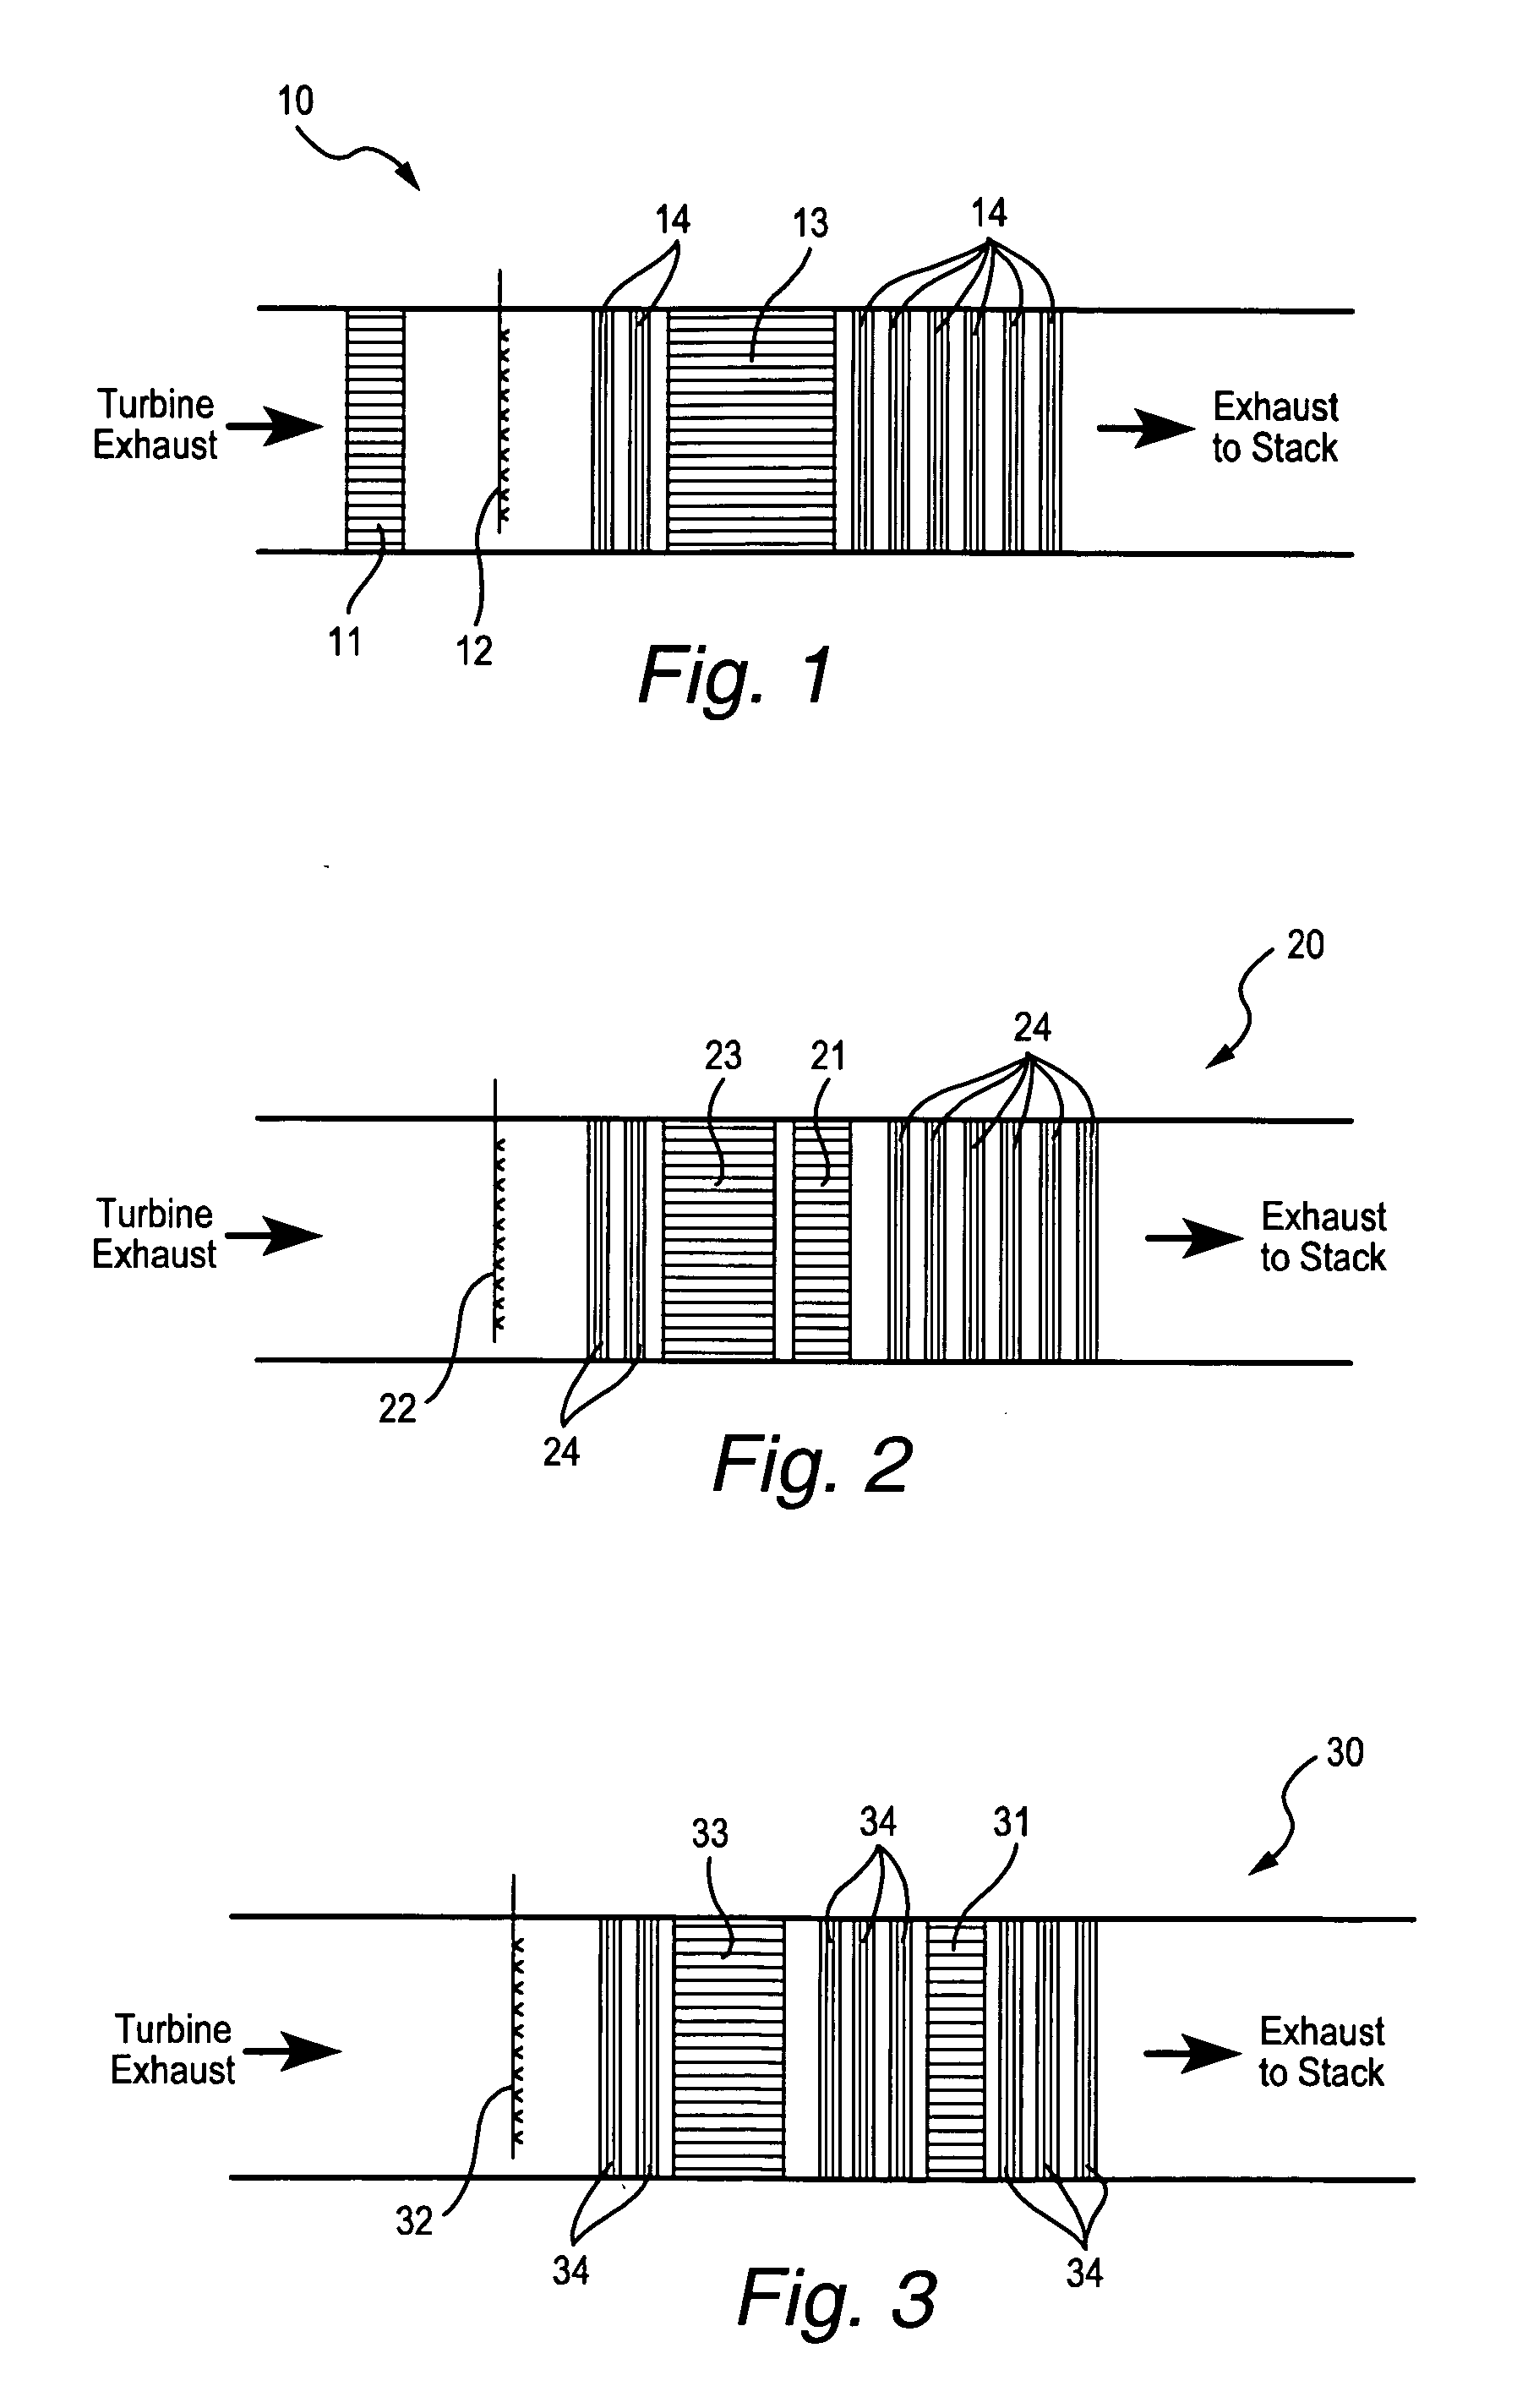 Process for treating ammonia-containing exhaust gases